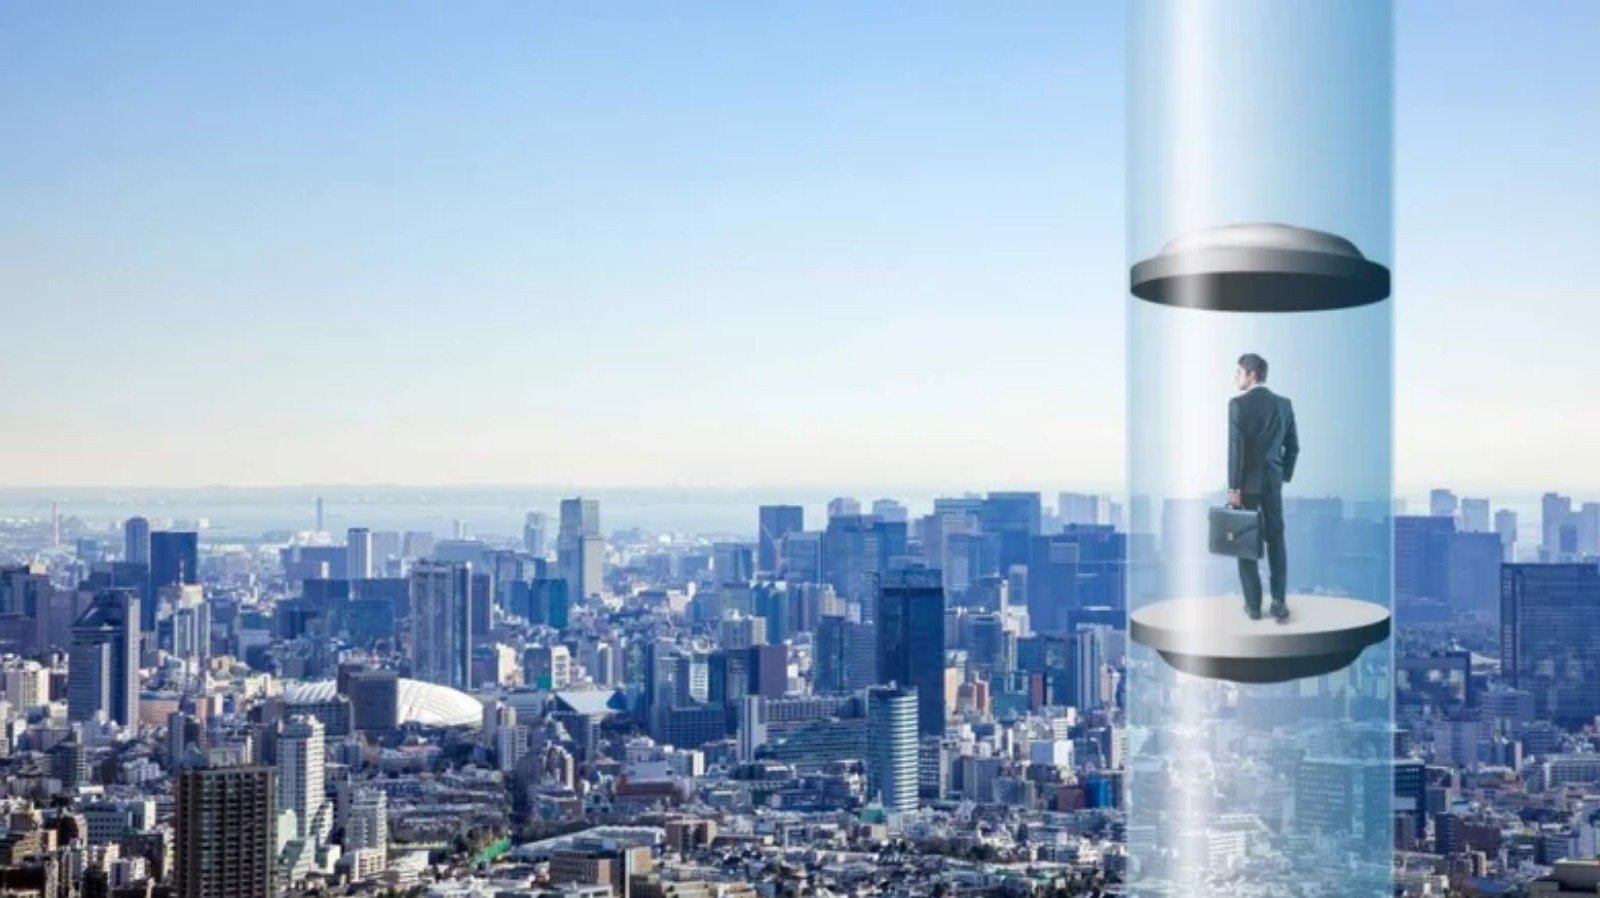 Is A Space Elevator Possible Using Today's Technology?